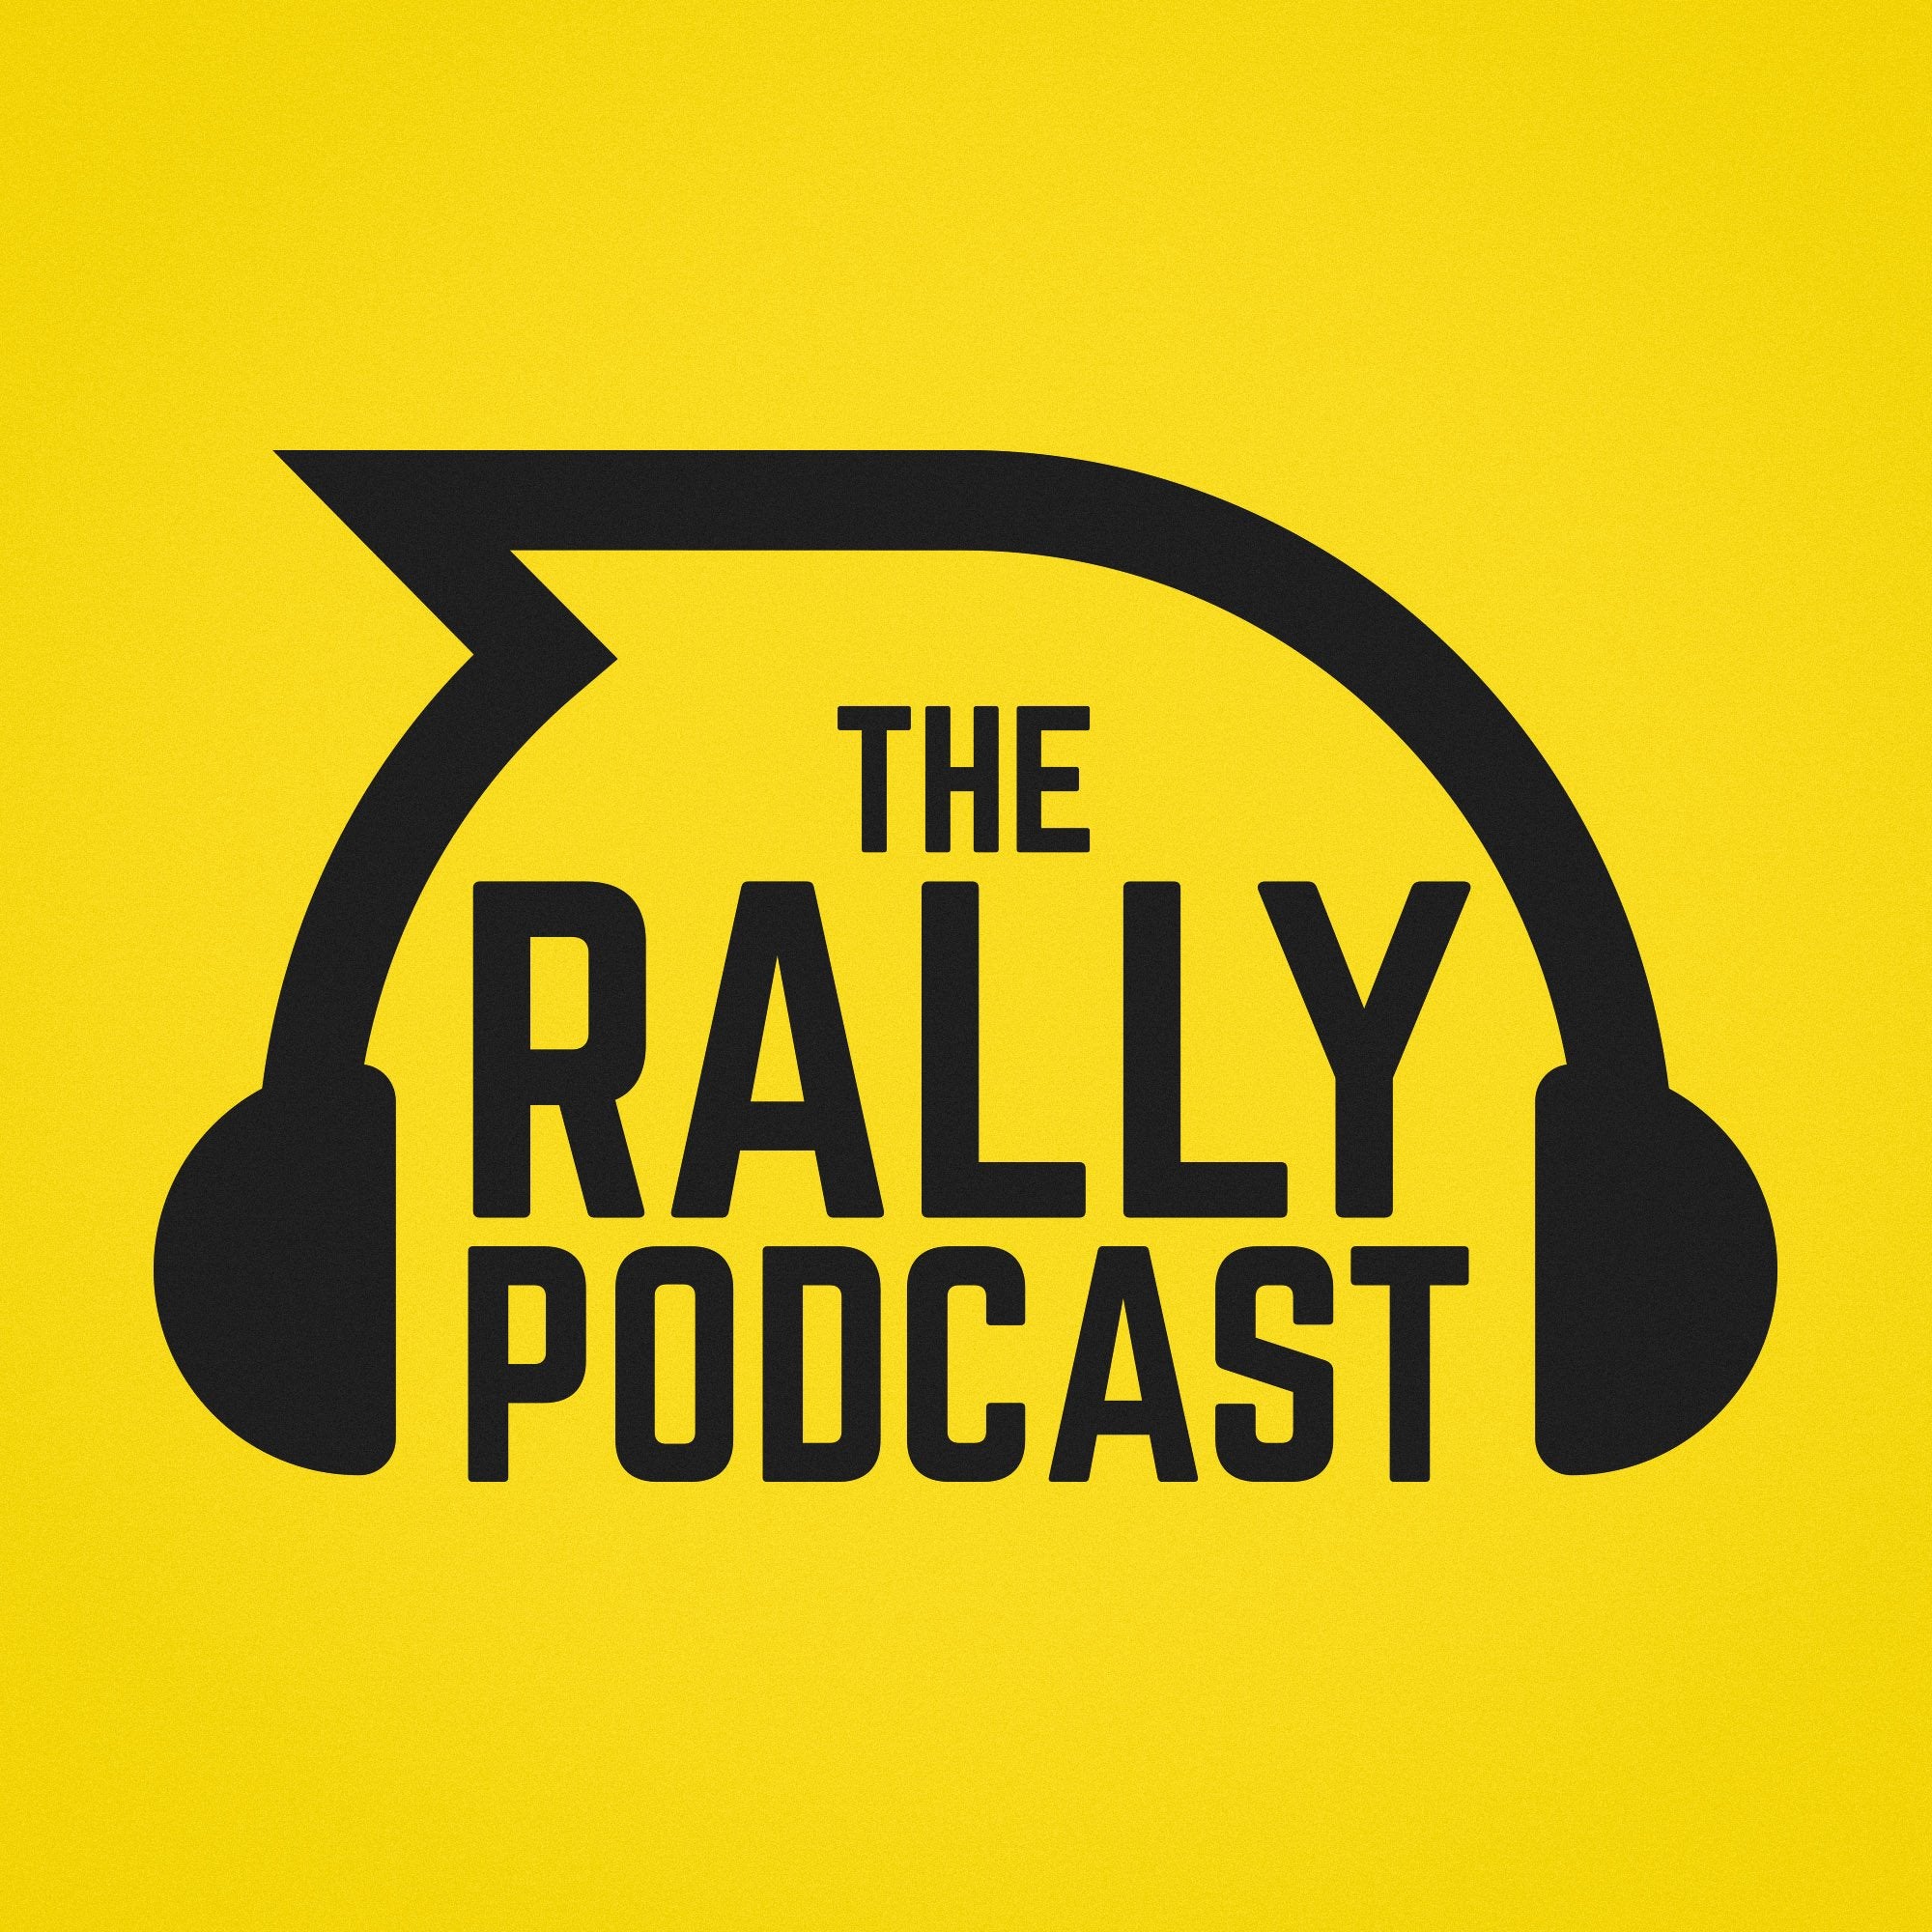 The Rally Podcast - 2018 Season, Episode 1 - #WhatUpTopDrop, Double Touches, and Returning Top Teams